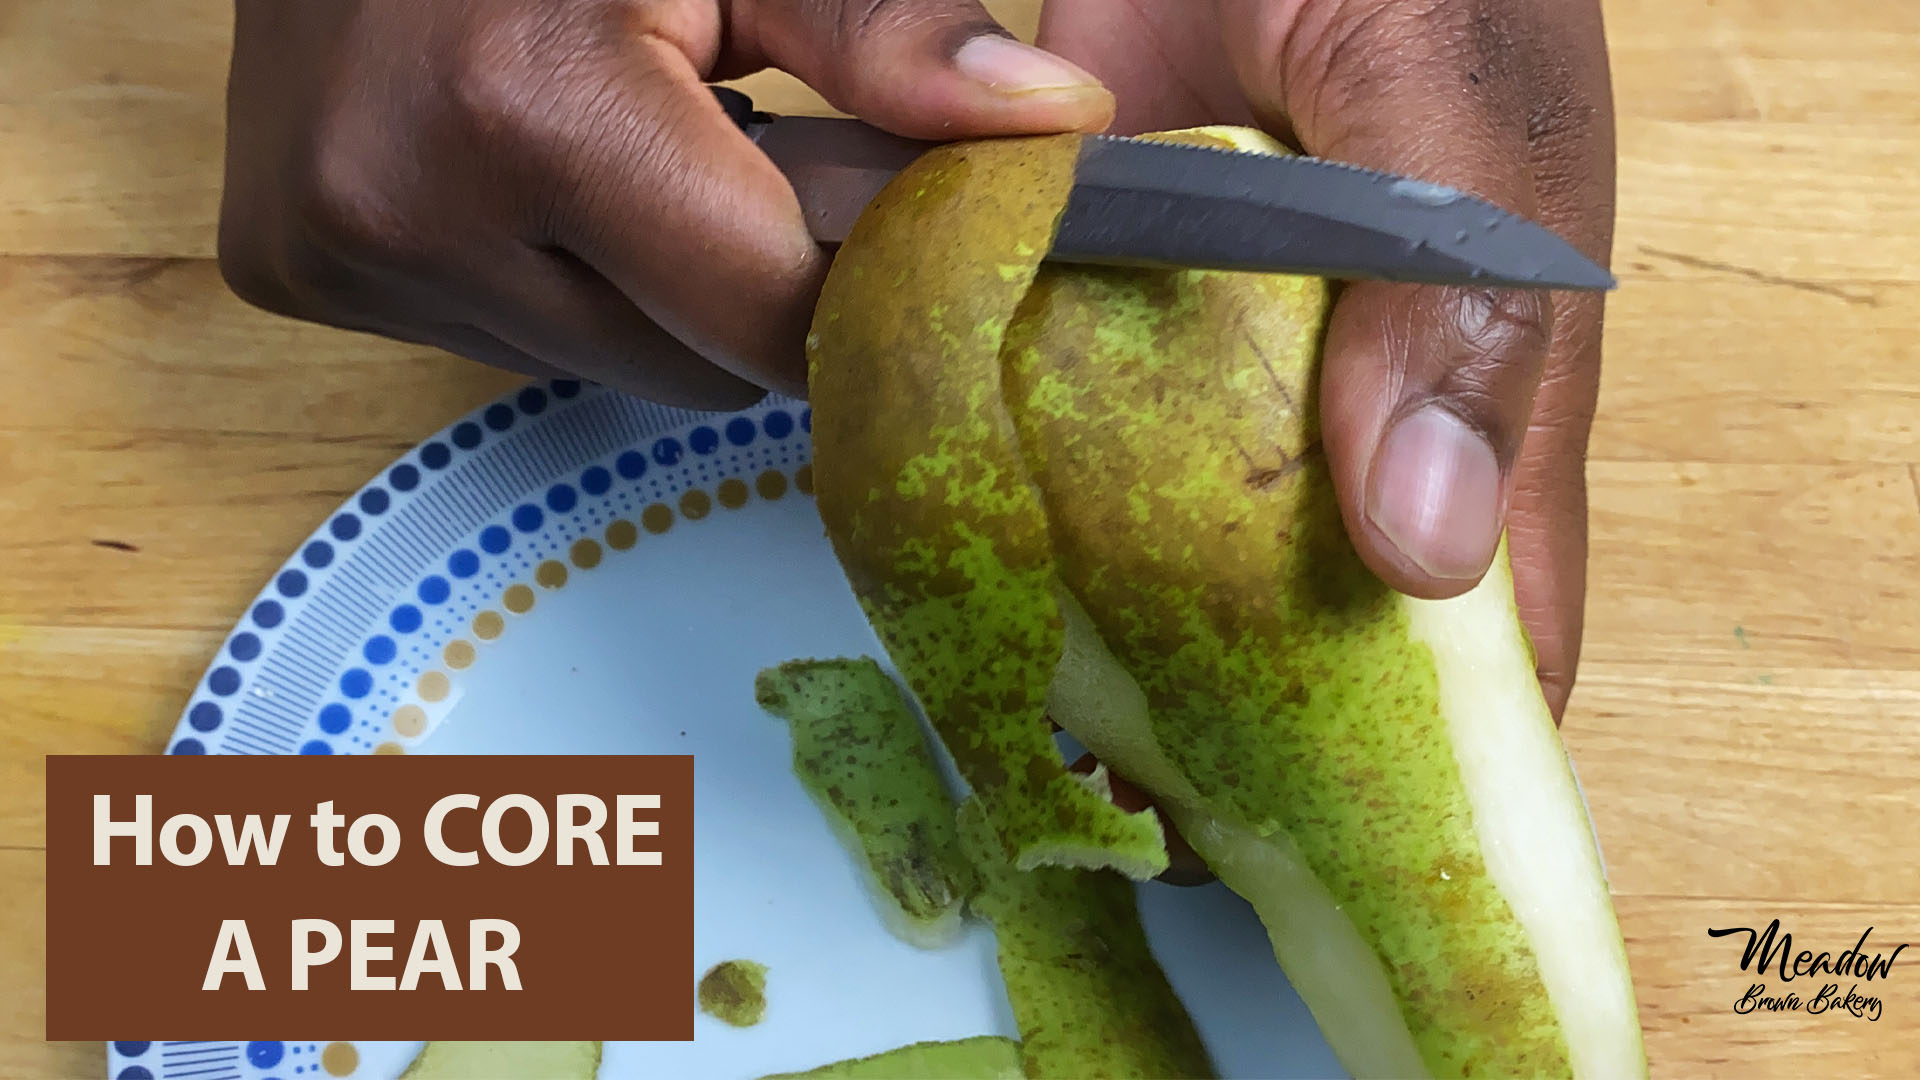 How to core a pear without a corer